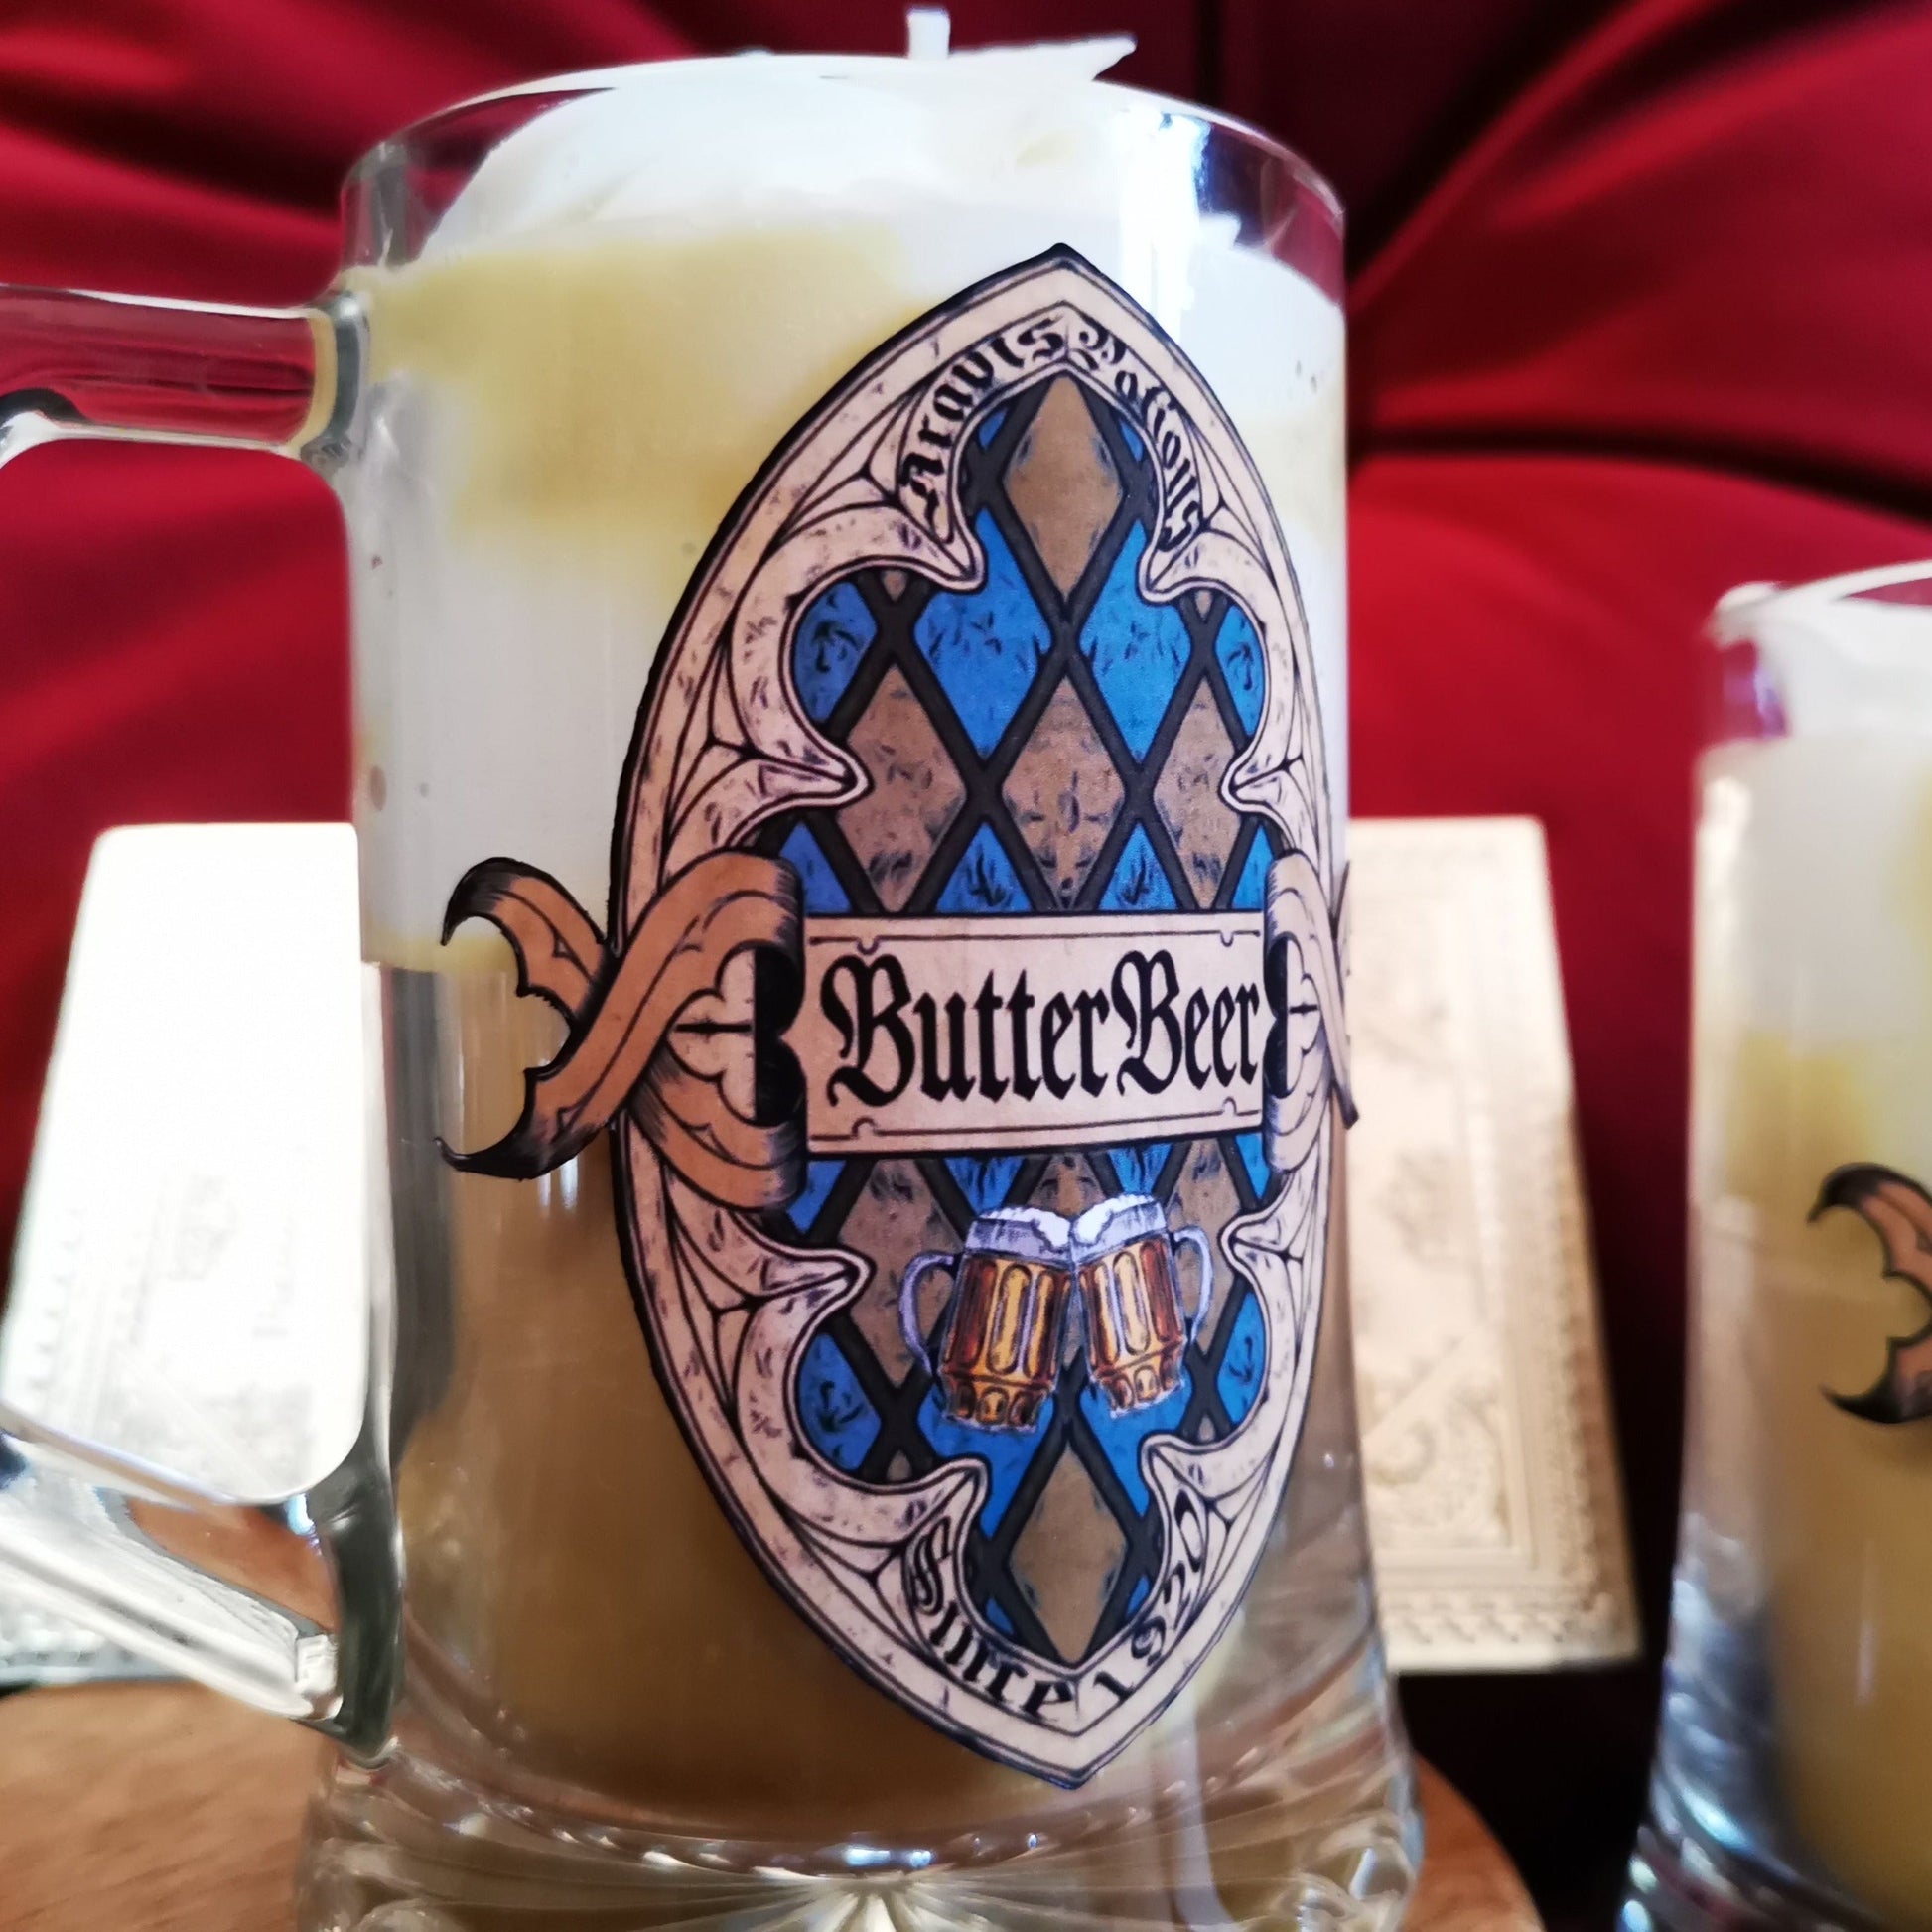 Butterbeer bougie/candle Aravis Potions Apothecary Harry Potter